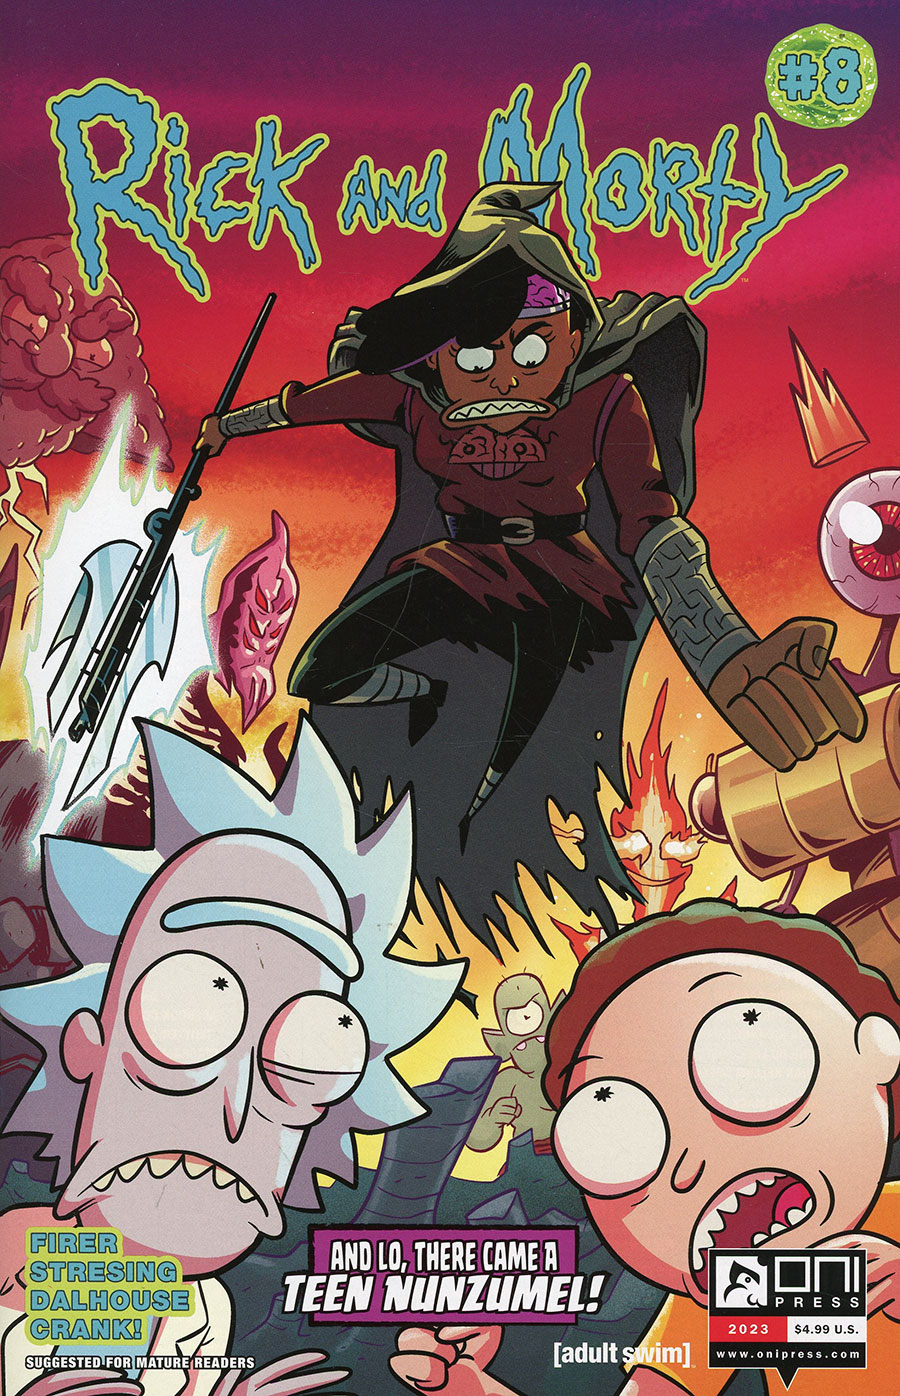 Rick And Morty Vol 2 #8 Cover A Regular Fred C Stresing Cover